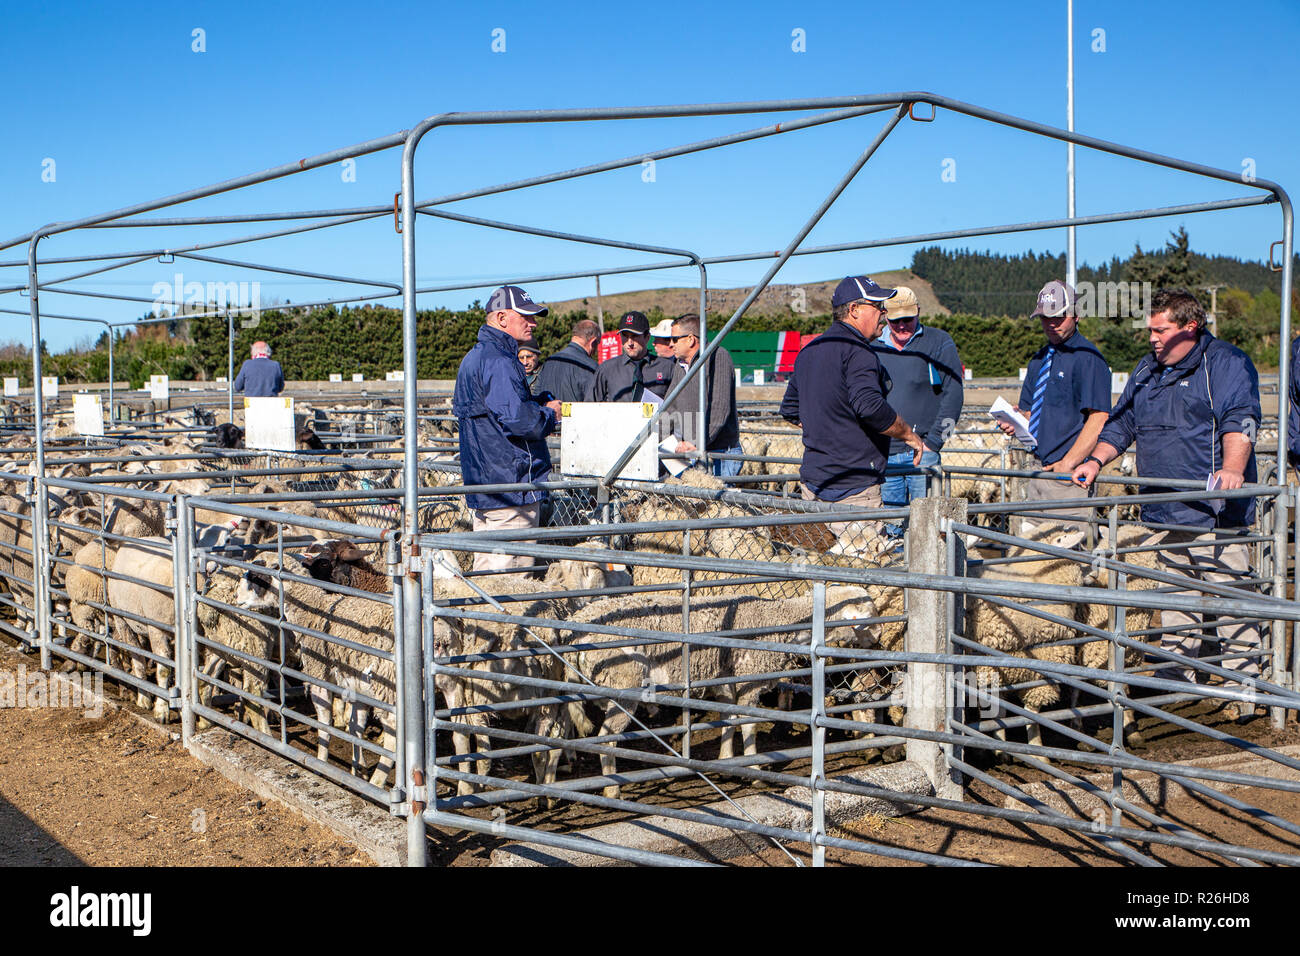 Coalgate, Canterbury, New Zealand - September 27 2018: Agents and farmers move along the pens of sheep as they are being auctioned on a spring morning Stock Photo